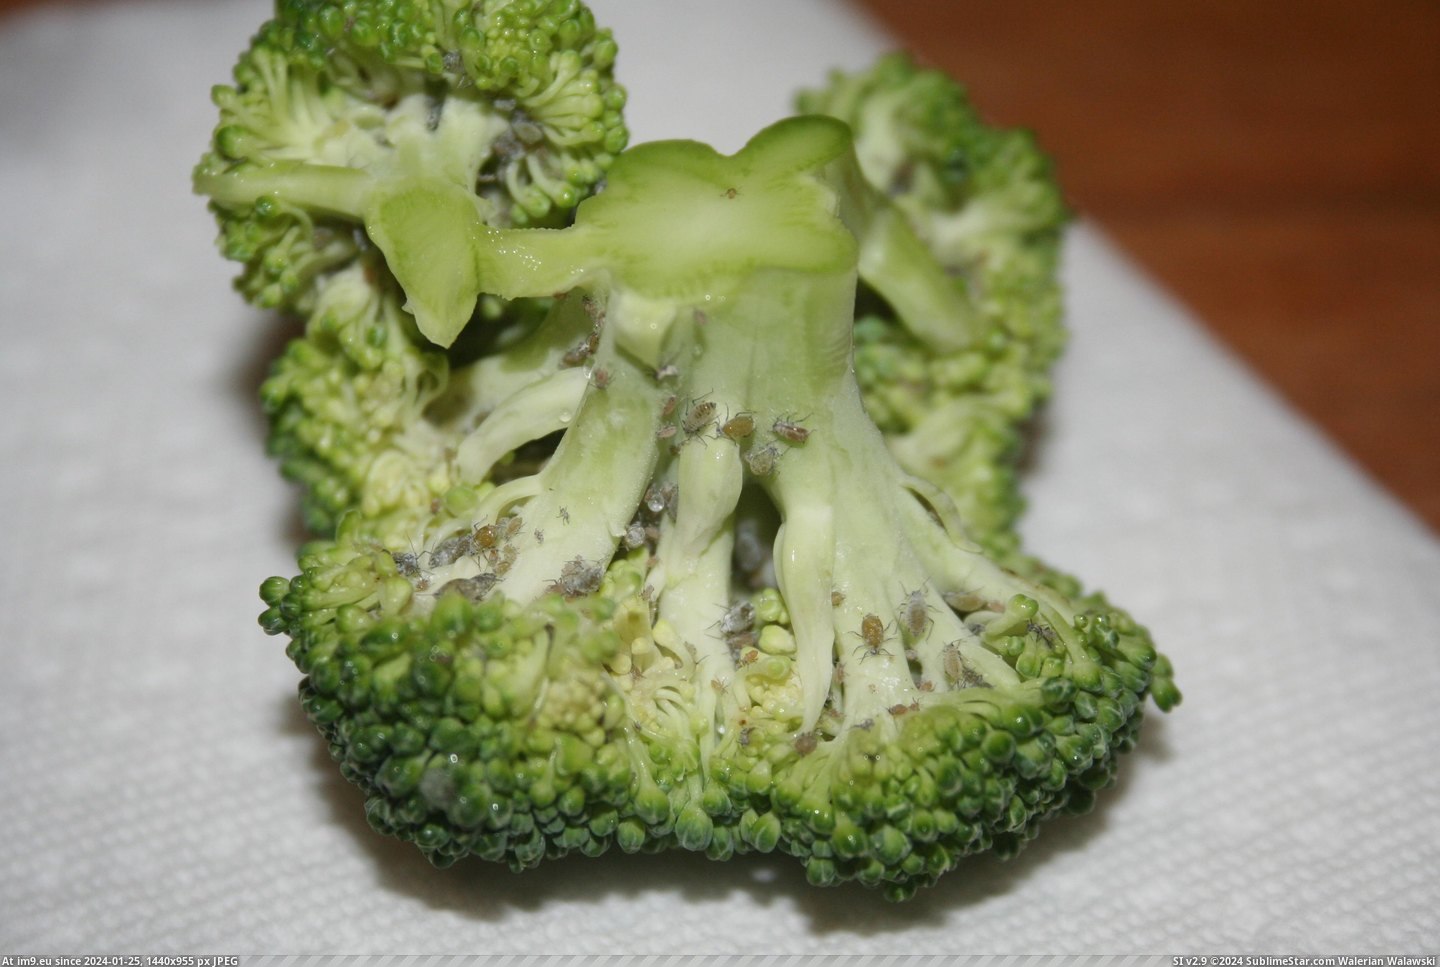 #Wtf #Extra #Protein #Chopping #Veggies #Closer #Ate [Wtf] Look closer when chopping veggies. I almost ate this. I don't want the extra protein, thanks. Pic. (Obraz z album My r/WTF favs))